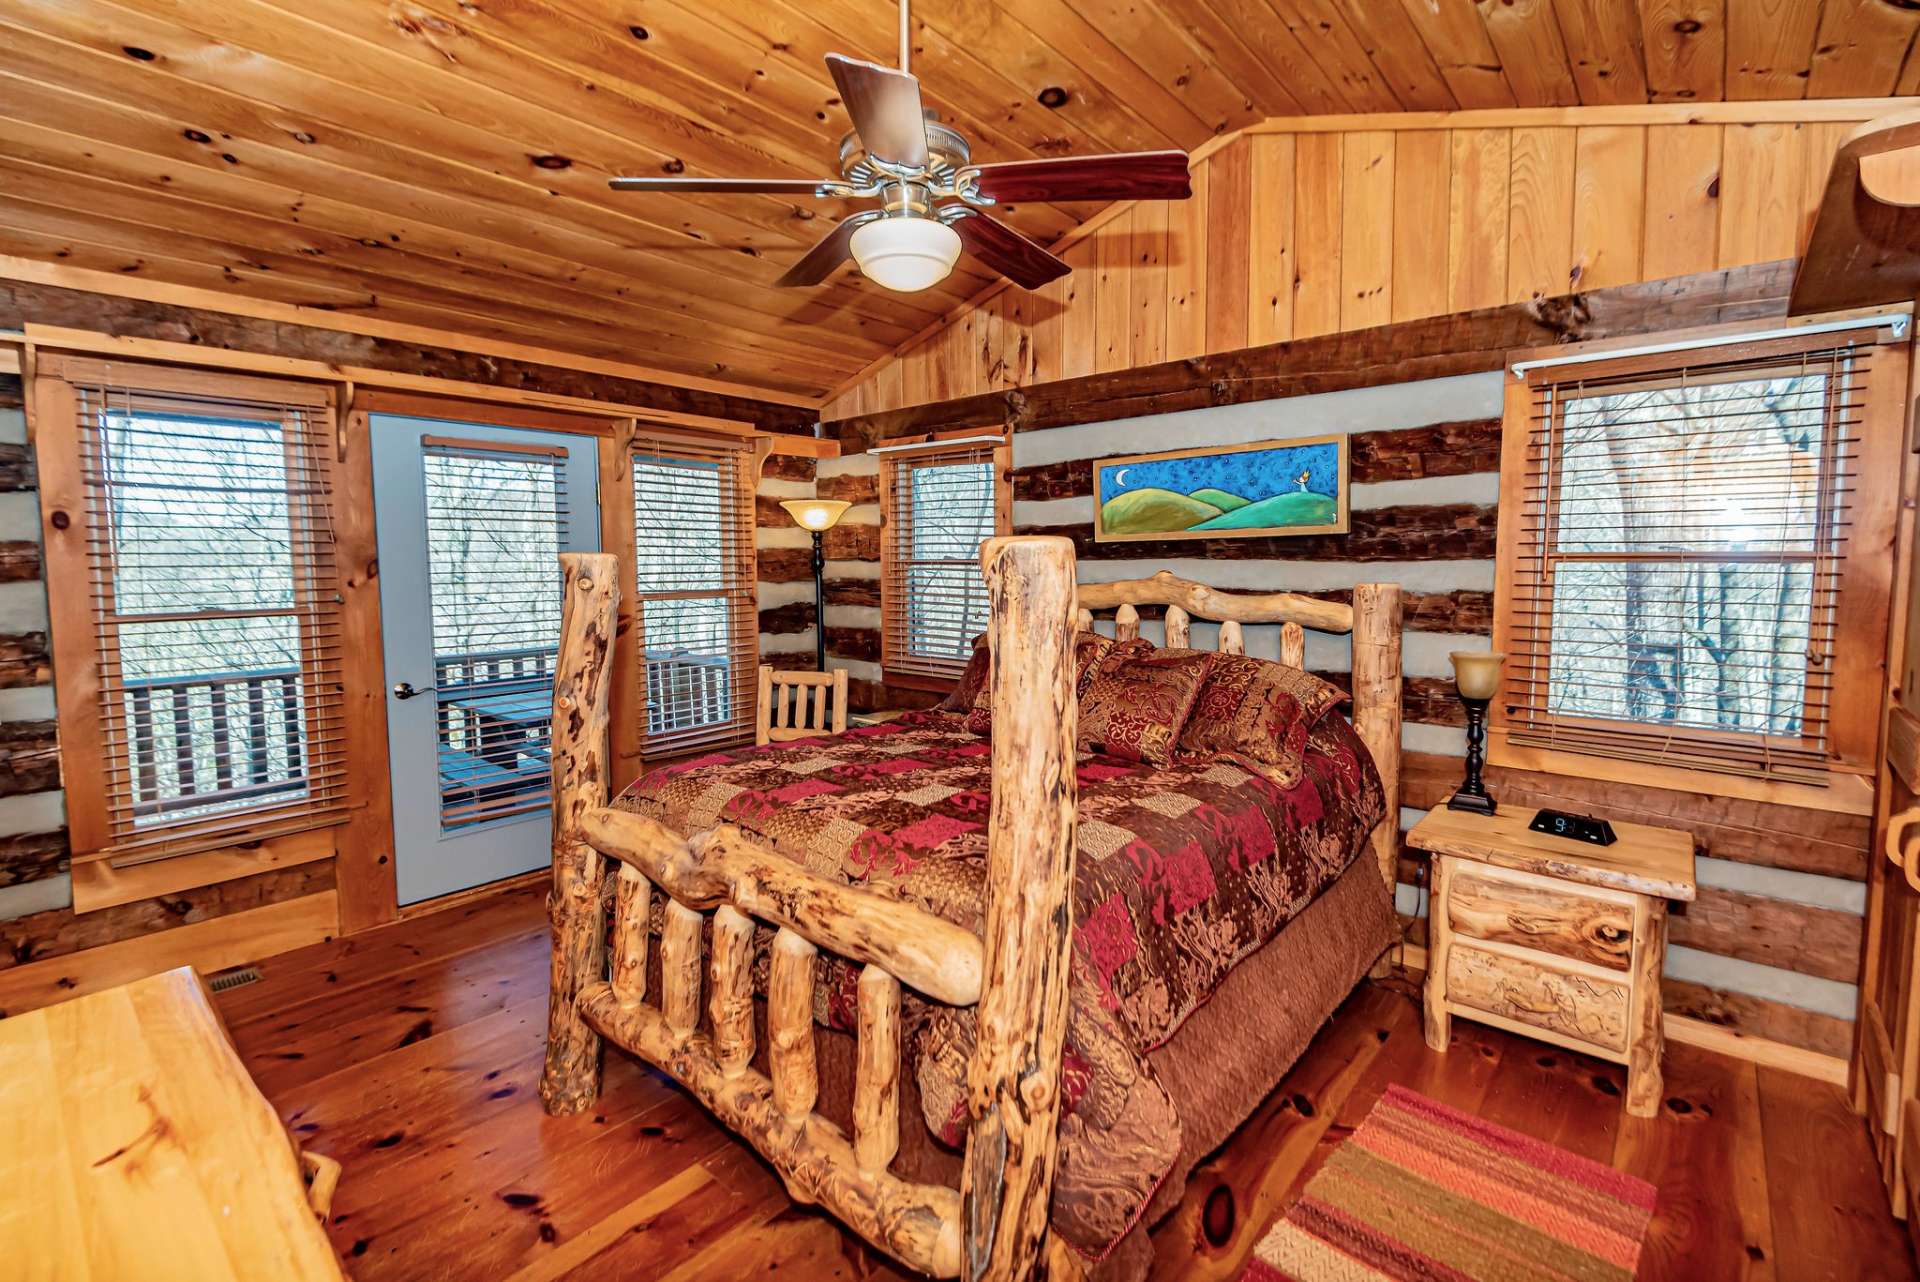 The main level bedroom has convenient access to the open deck.